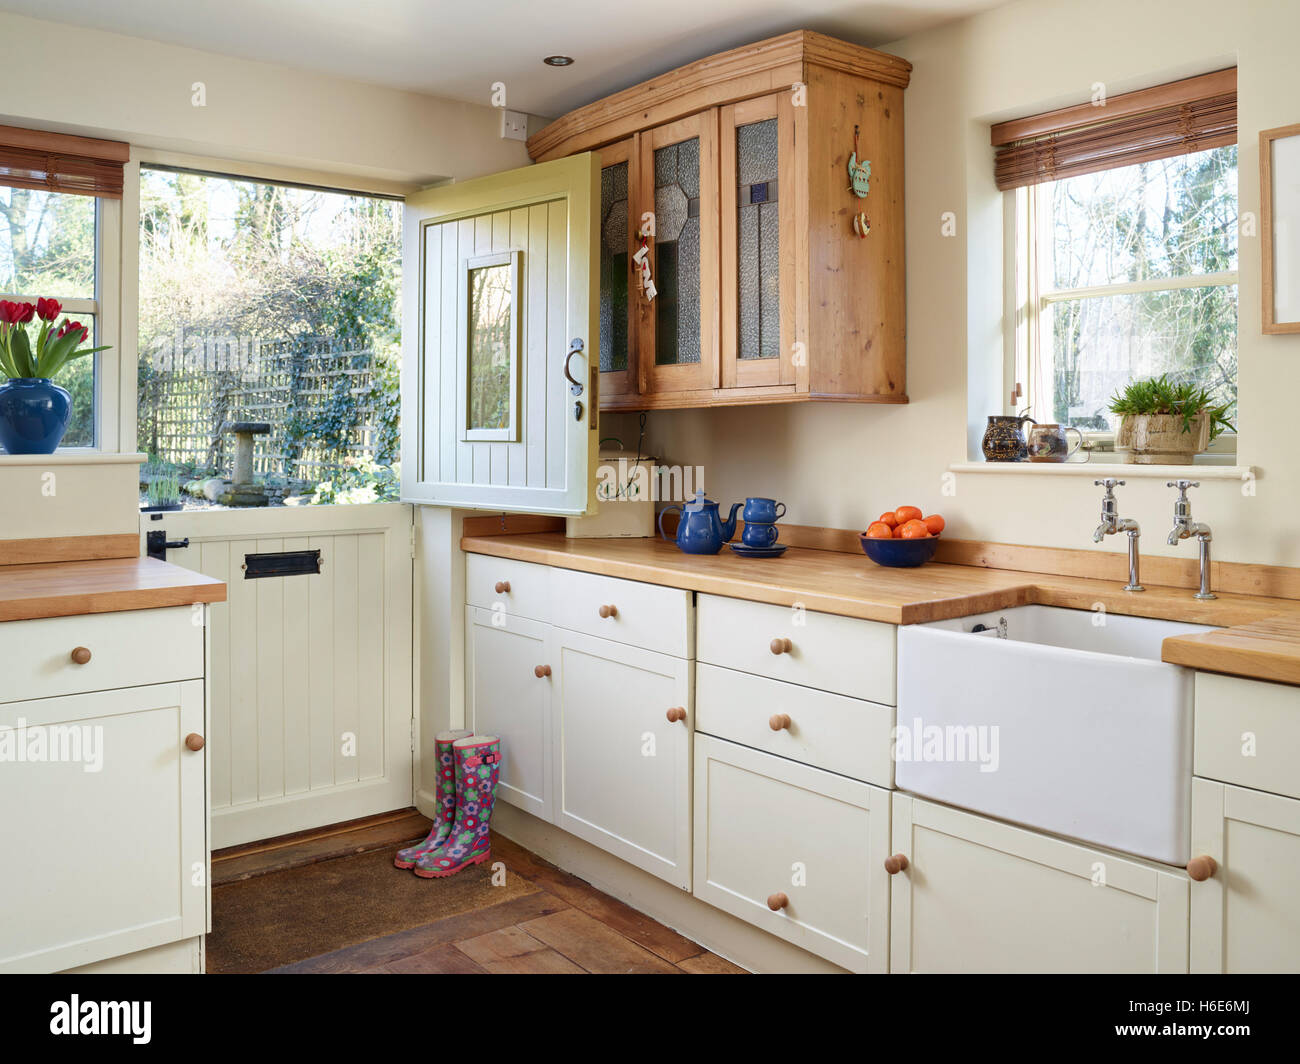 A contemporary contry kitchen Bincorporating a Belfast sink & wood work surfaces. Oxfordshire, UK Stock Photo